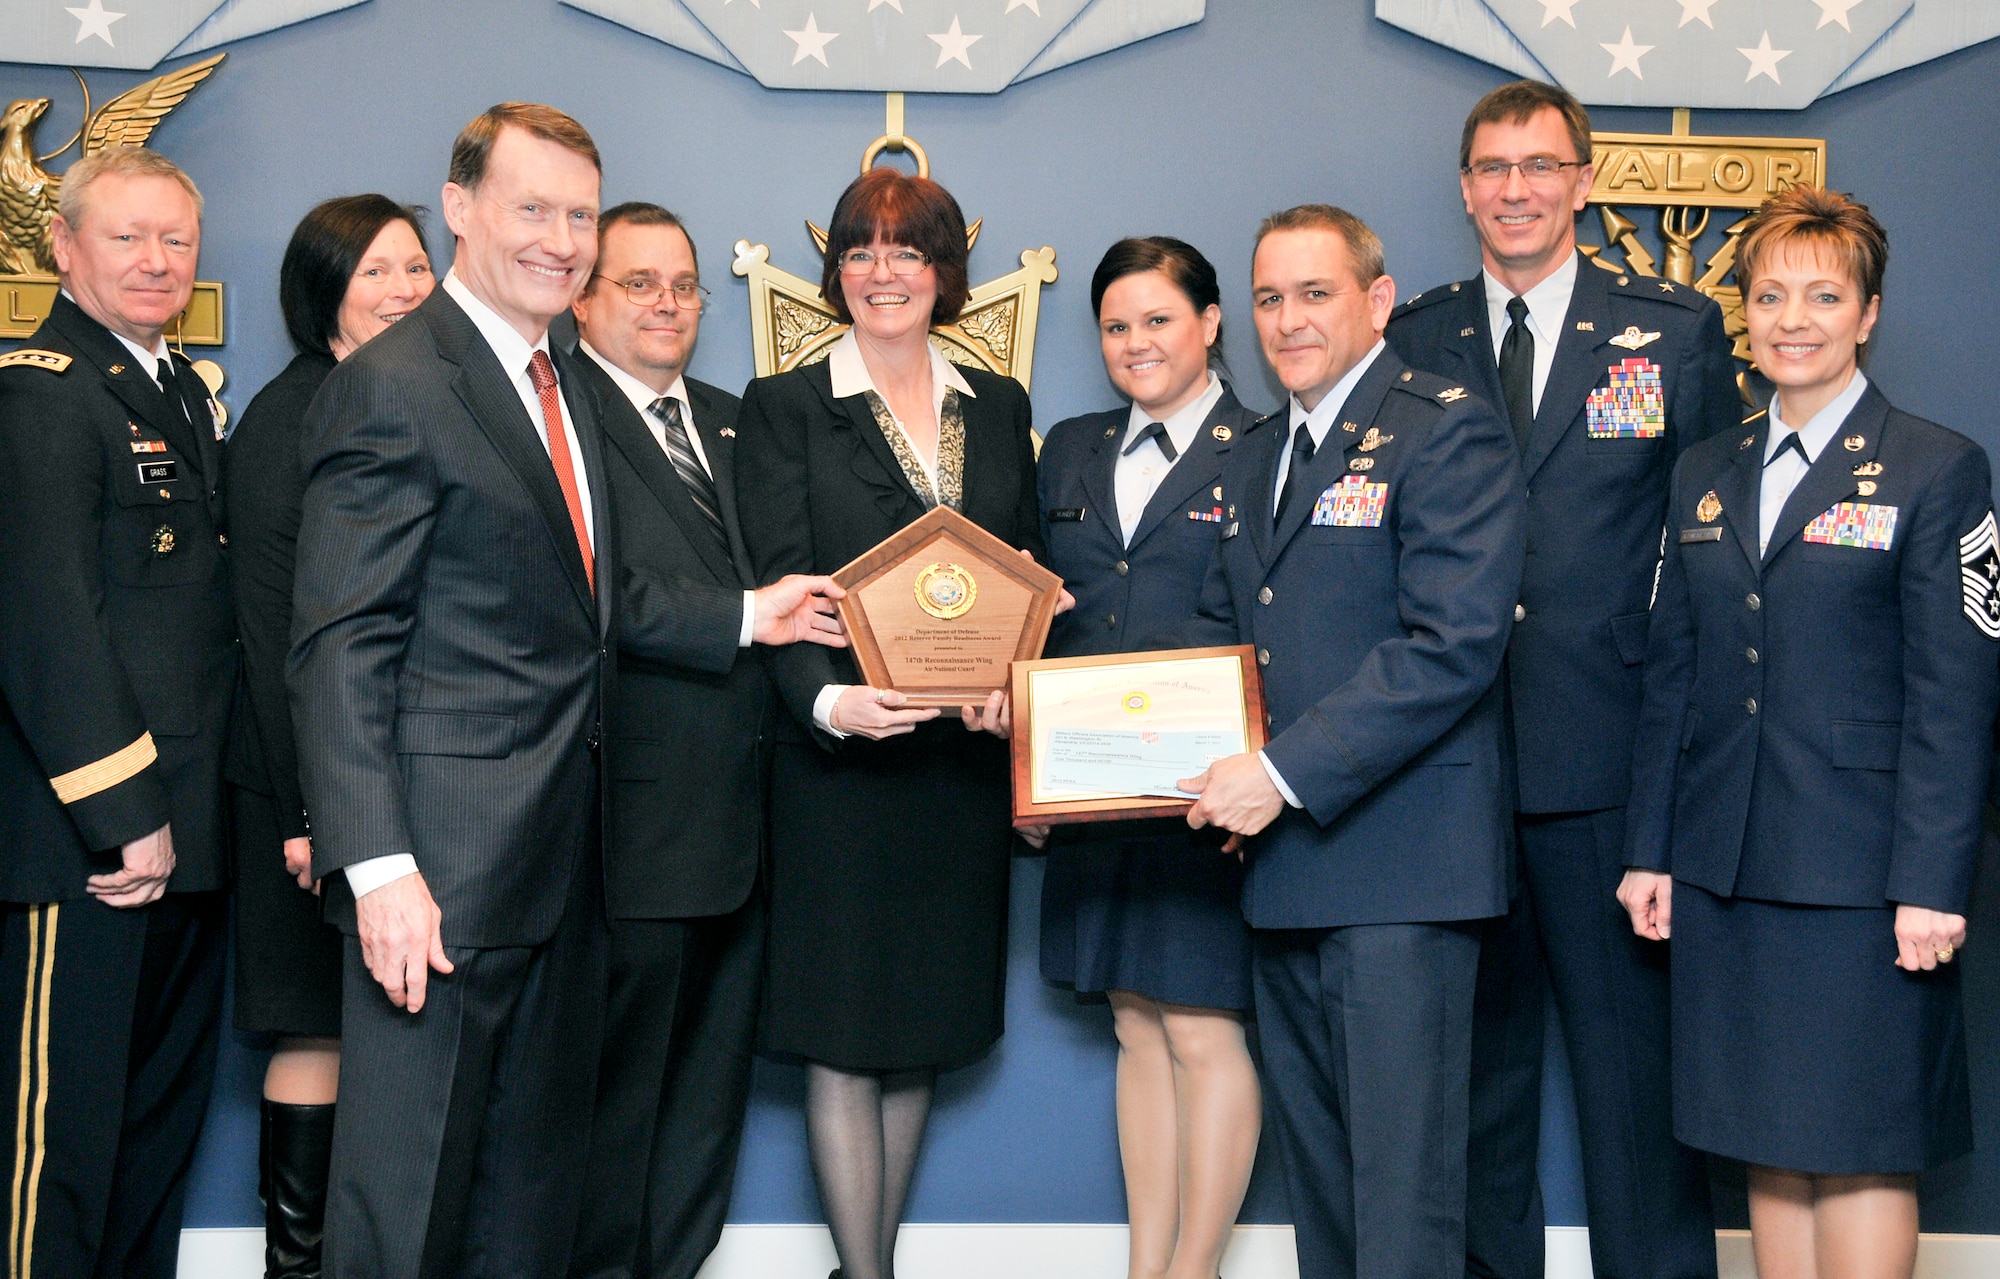 Department of Defense and National Guard leaders present the 147th Reconnaissance Wing Airman and Family Readiness Program office with the 2012 DoD Reserve Family Readiness Award for the Air National Guard during a ceremony at the Pentagon on March 1, 2013.
(From left: Gen. Frank Grass, Director NGB; Ms. Grass; Mr. John T. Hastingsl Acting Principle Deputy, Assistant Secretary of Defense for Reserve Affairs; Michael Norton; Ms. Monalisa Norton, 147RW Airman and Family Readiness Program Manager (FRG); Staff Sgt. Holly Yeagley, 147RW FRG Assistant; Col. John Daniel, Commander 147RW; Brig. Gen Kenneth Wisian, Commander Texas Air National Guard; Chief Master Sgt. Denise M. Jelinski-Hall, Senior Enlisted Leader for the National Guard Bureau) (National Guard Photo by Master Sgt. Sean Cowher)